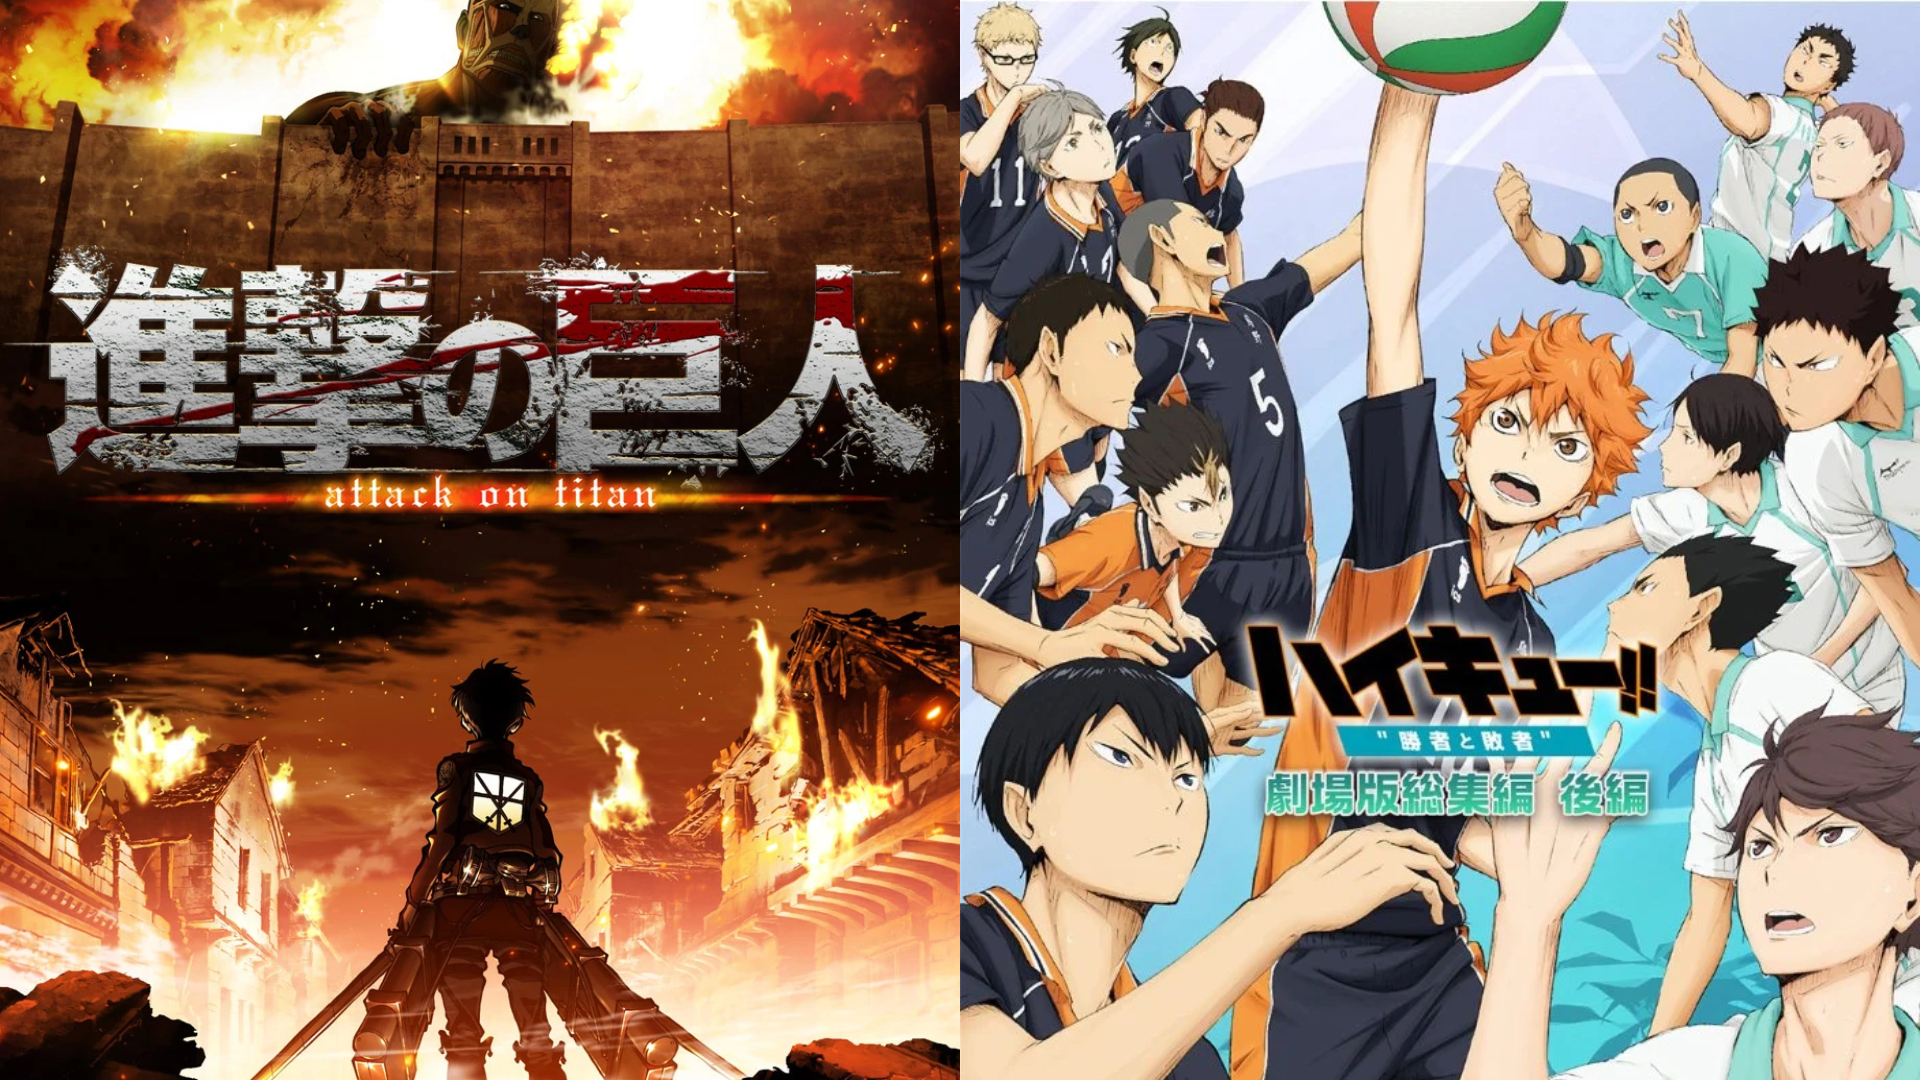 UPDATED: Attack on Titan, Haikyuu Anime Openings and More Played During  Olympics in Japan - Anime Corner